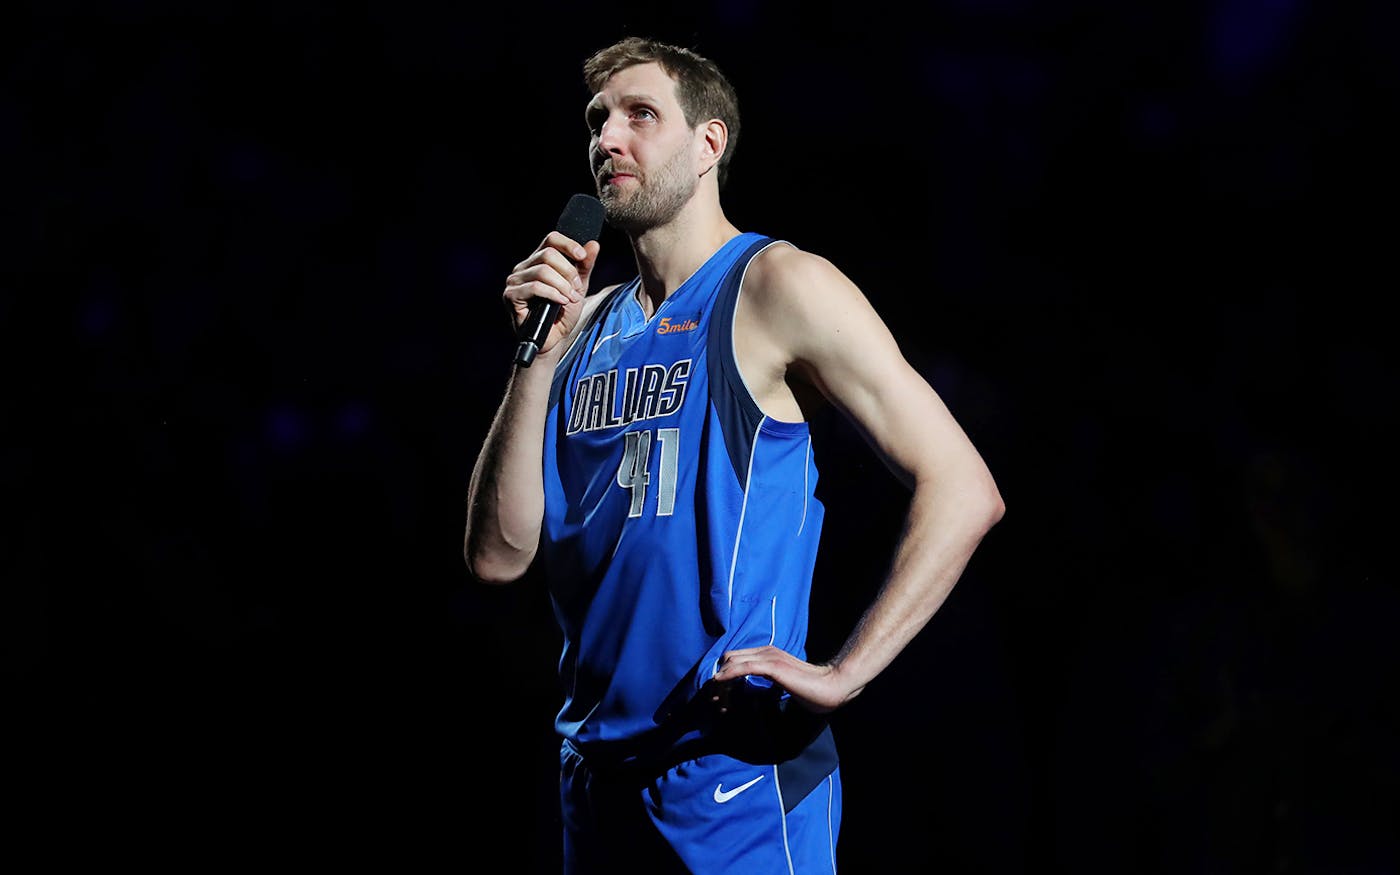 PHOTOS: 2011 NBA All-Star Game Jerseys Are 'Tight' As In 'Fitting